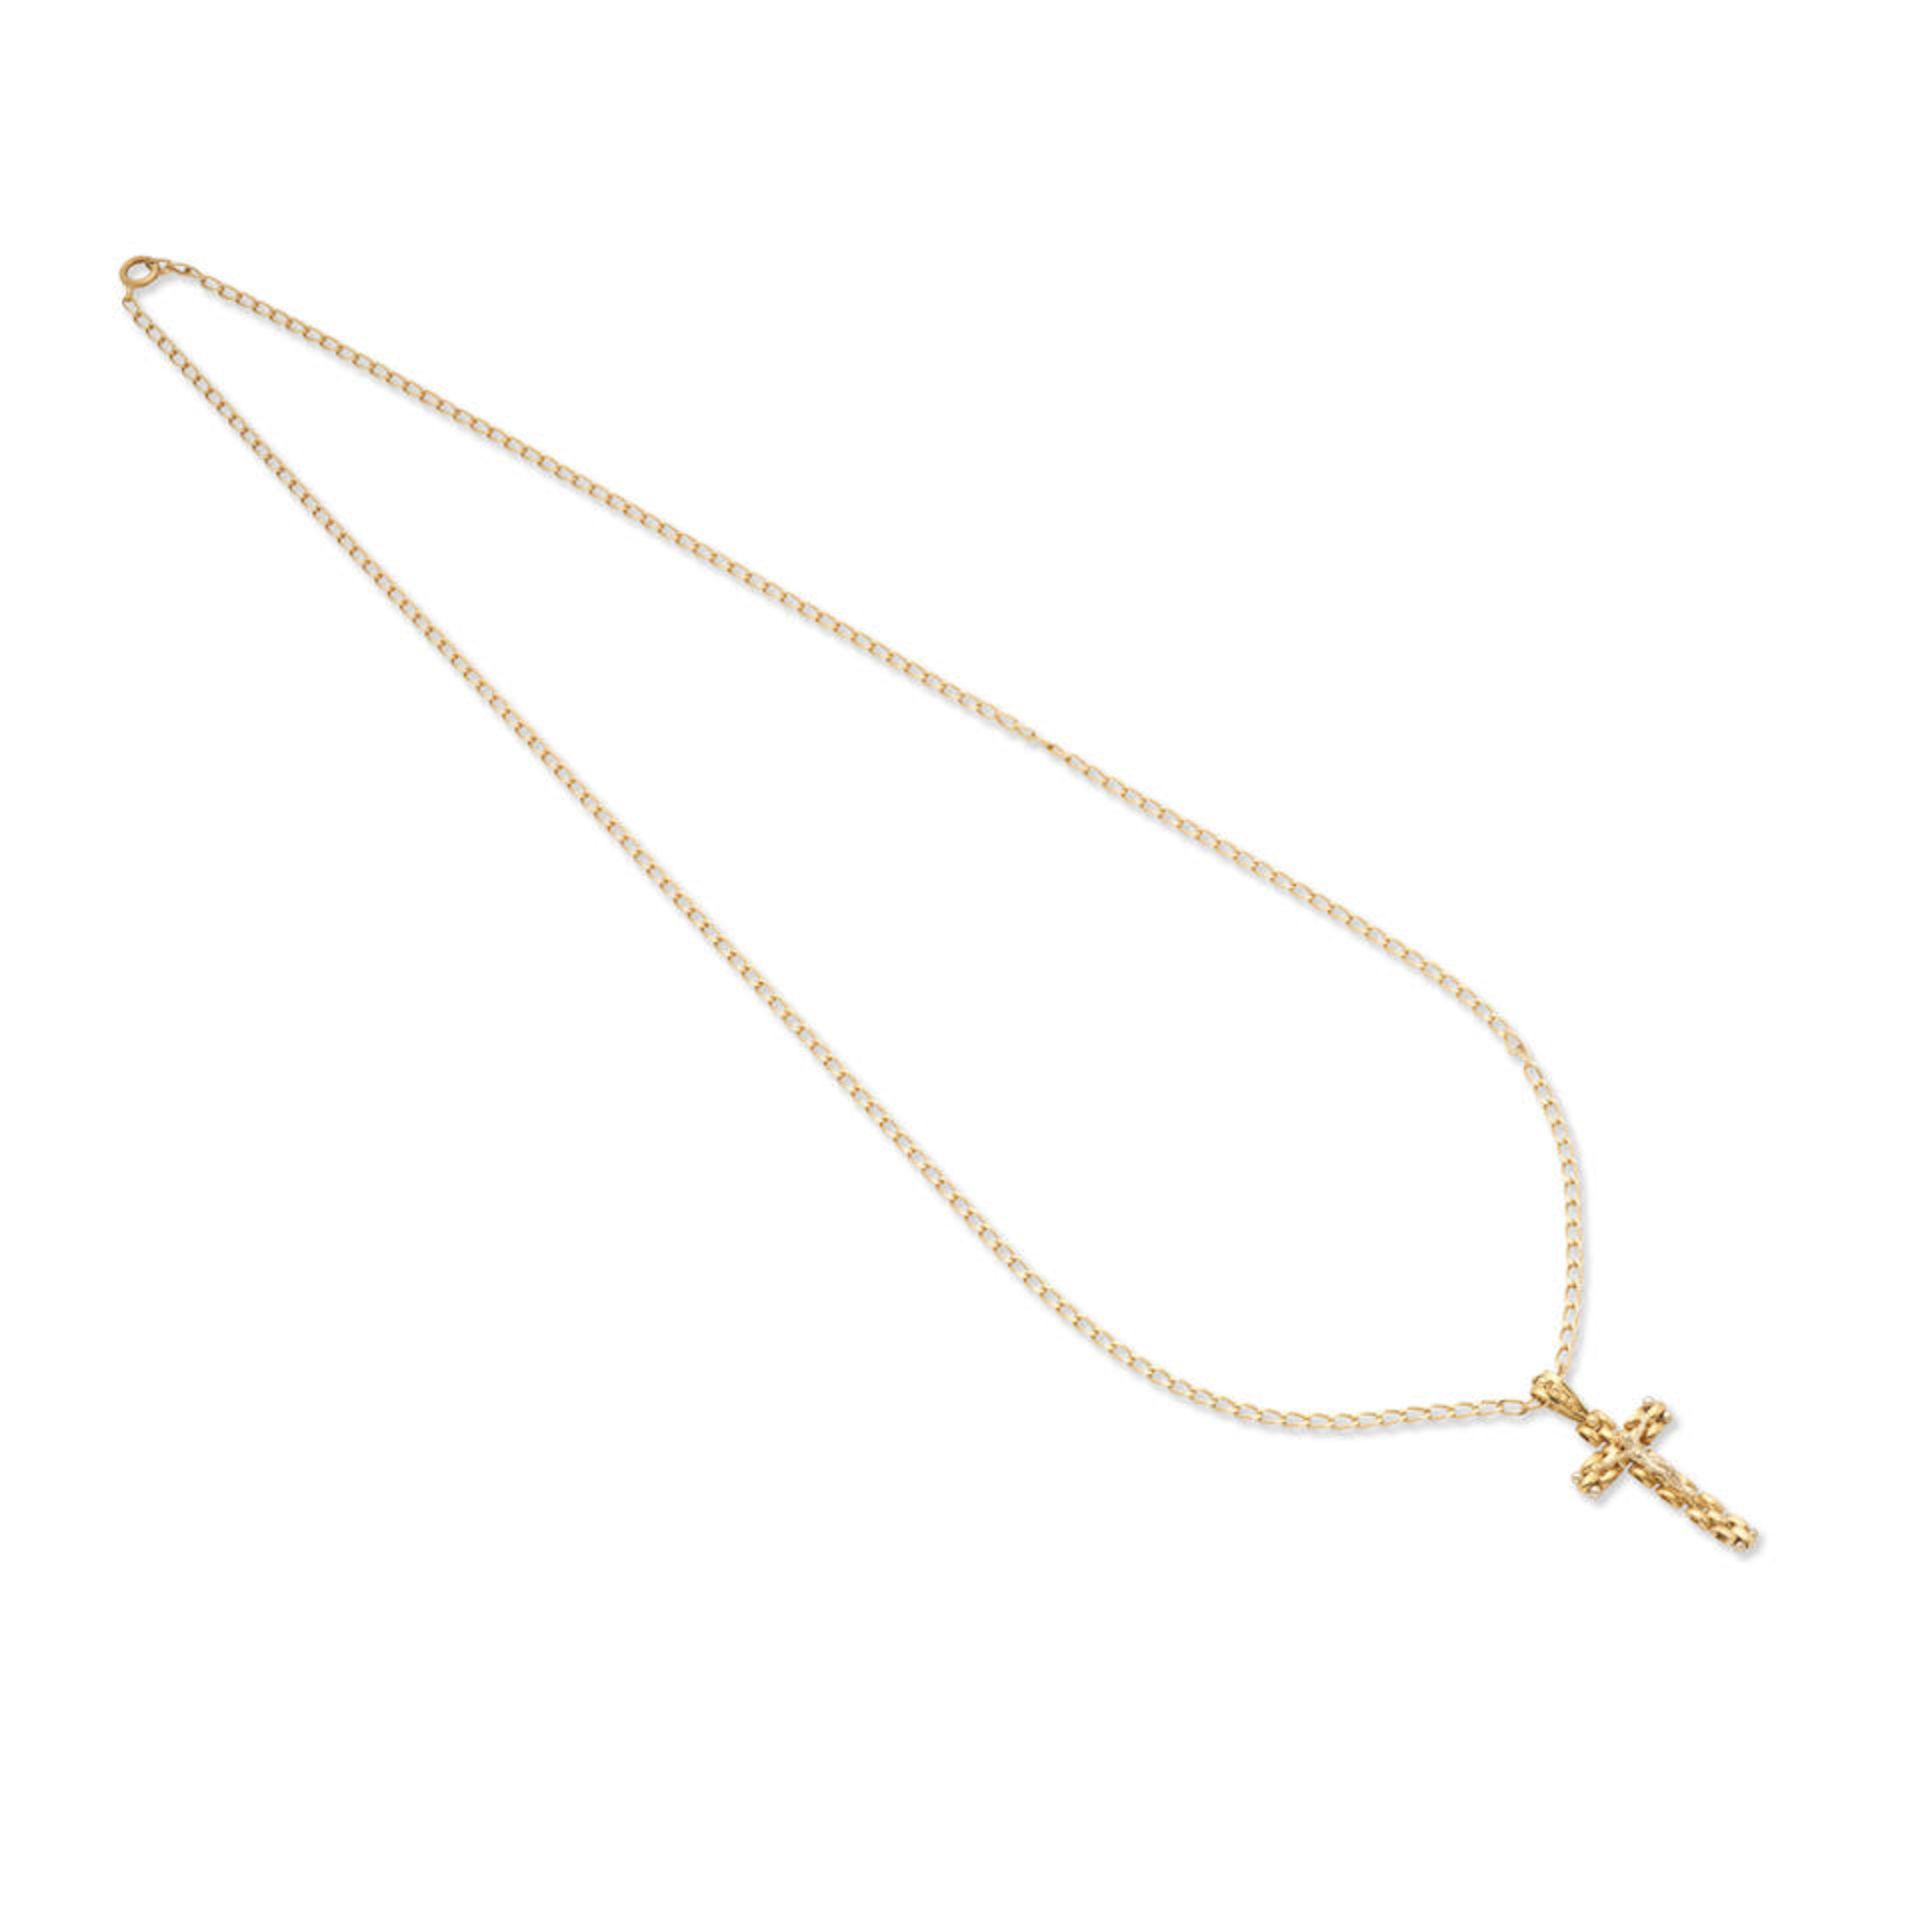 GOLD CROSS NECKLACE COLLIER 'CROIX' OR